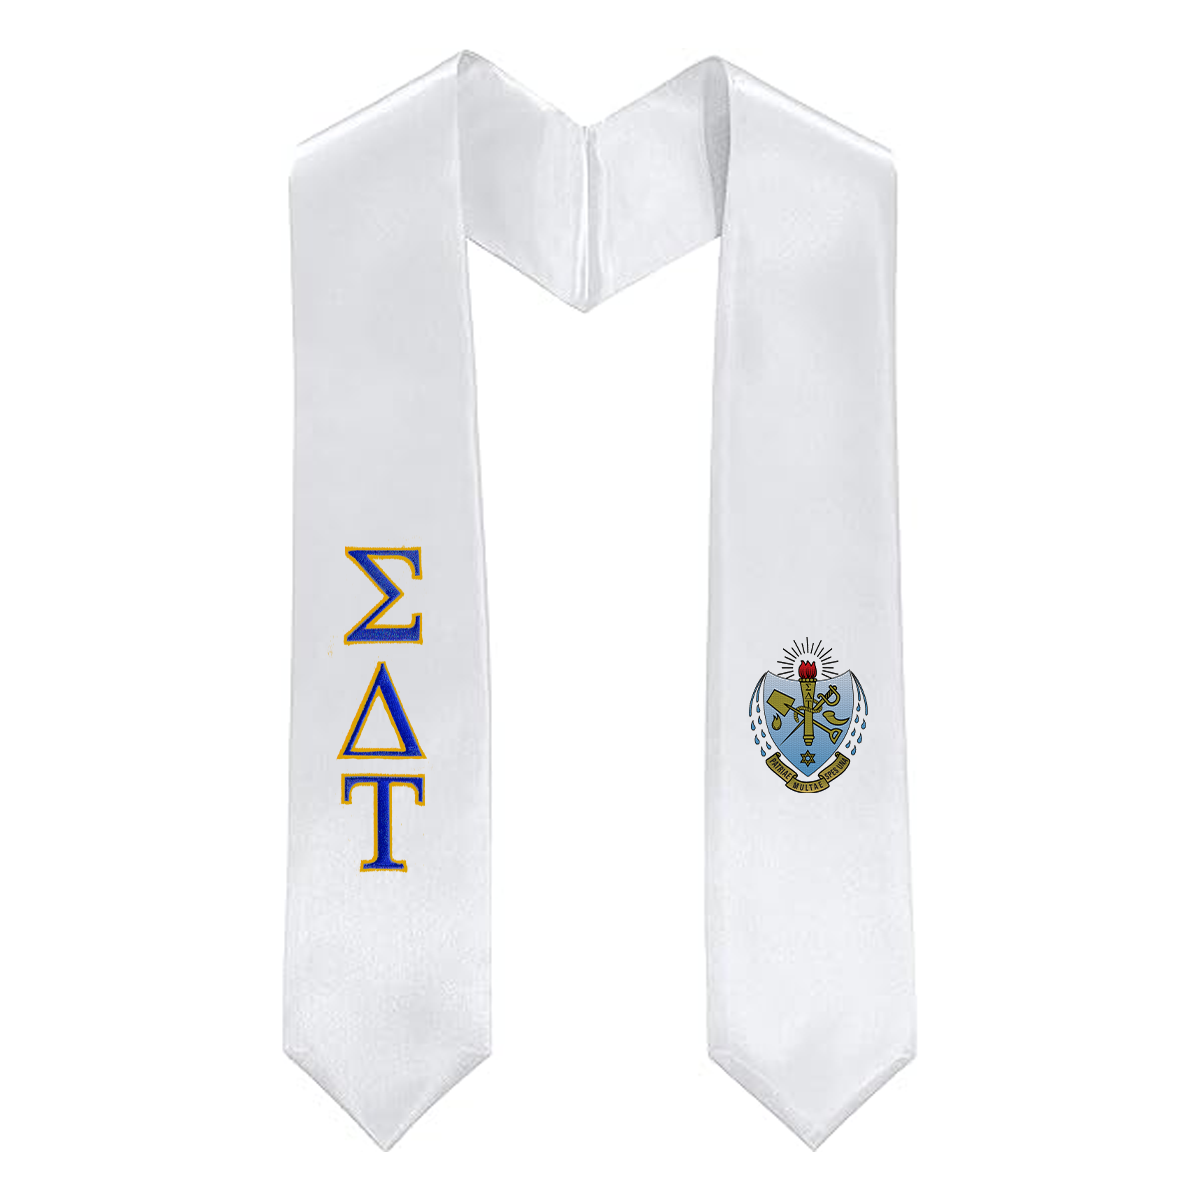 Greek Graduation Stole with Embroidered Crest and Letters - EMB